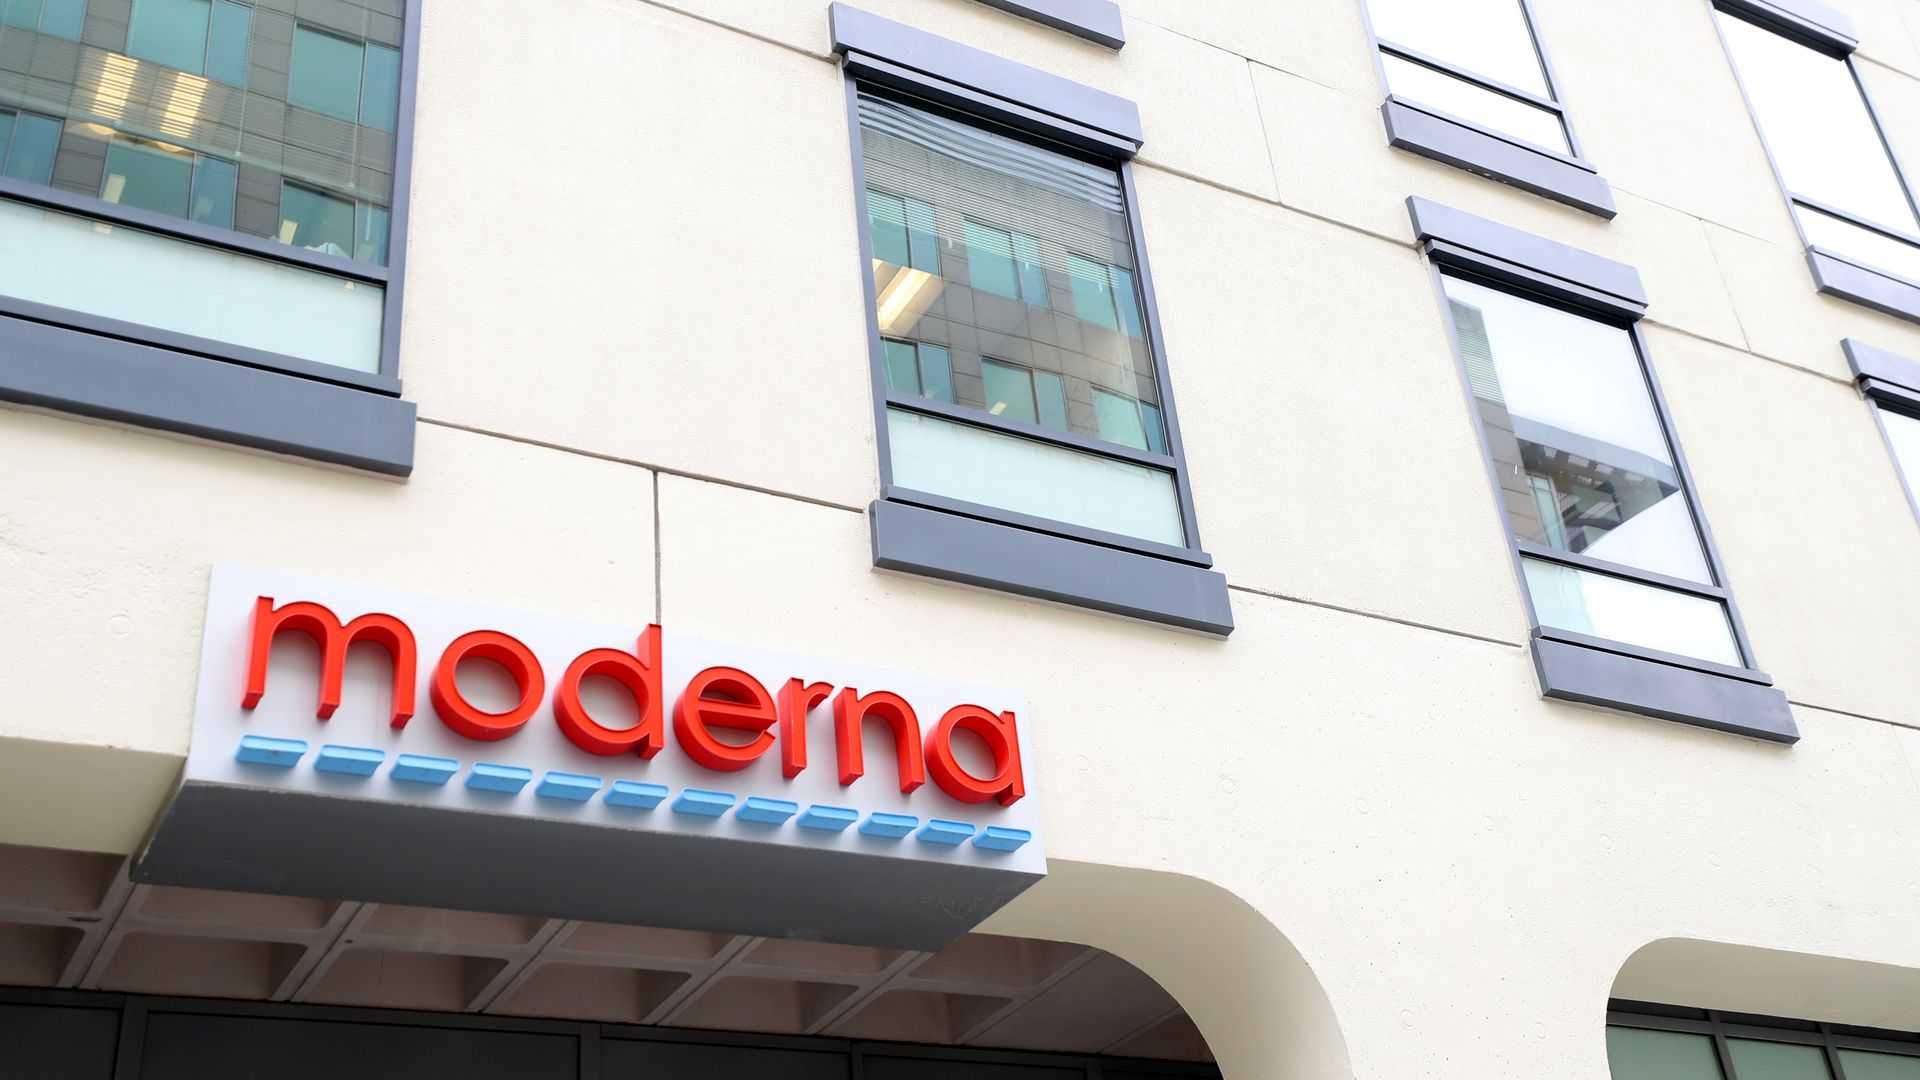 Moderna's red logo atop its headquarters building.